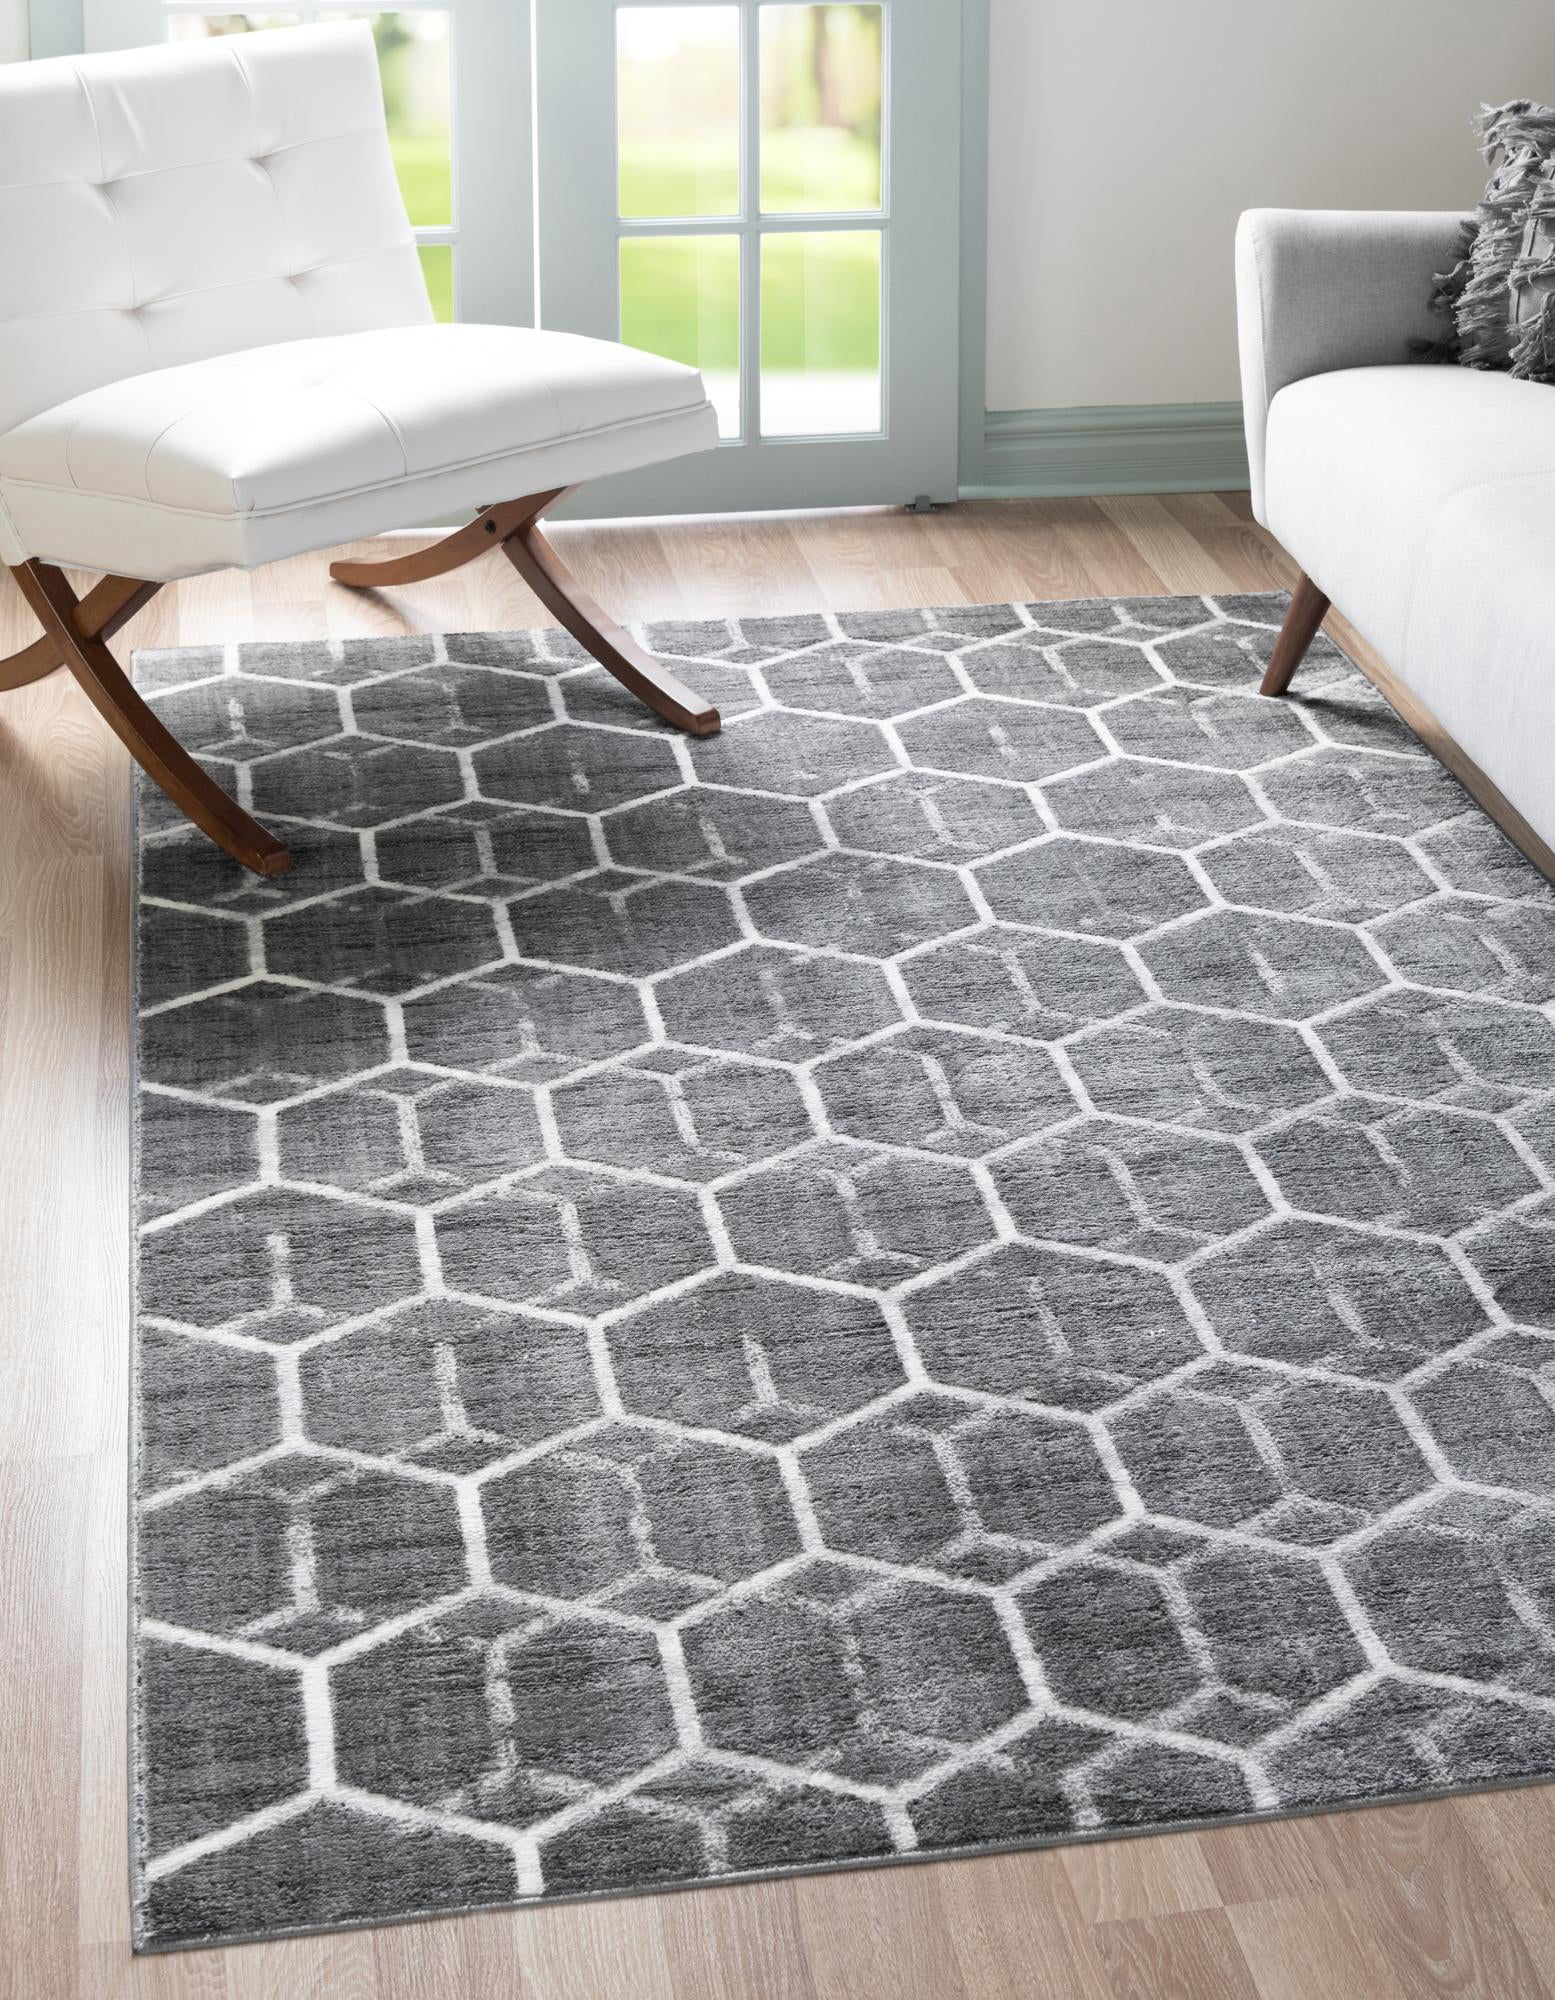 White Low-Pile Rug Perfect for Living Rooms,Large Dining Rooms,Open Floorplans,5 x 8 Feet Rugs.com Lattice Trellis Collection Rug 